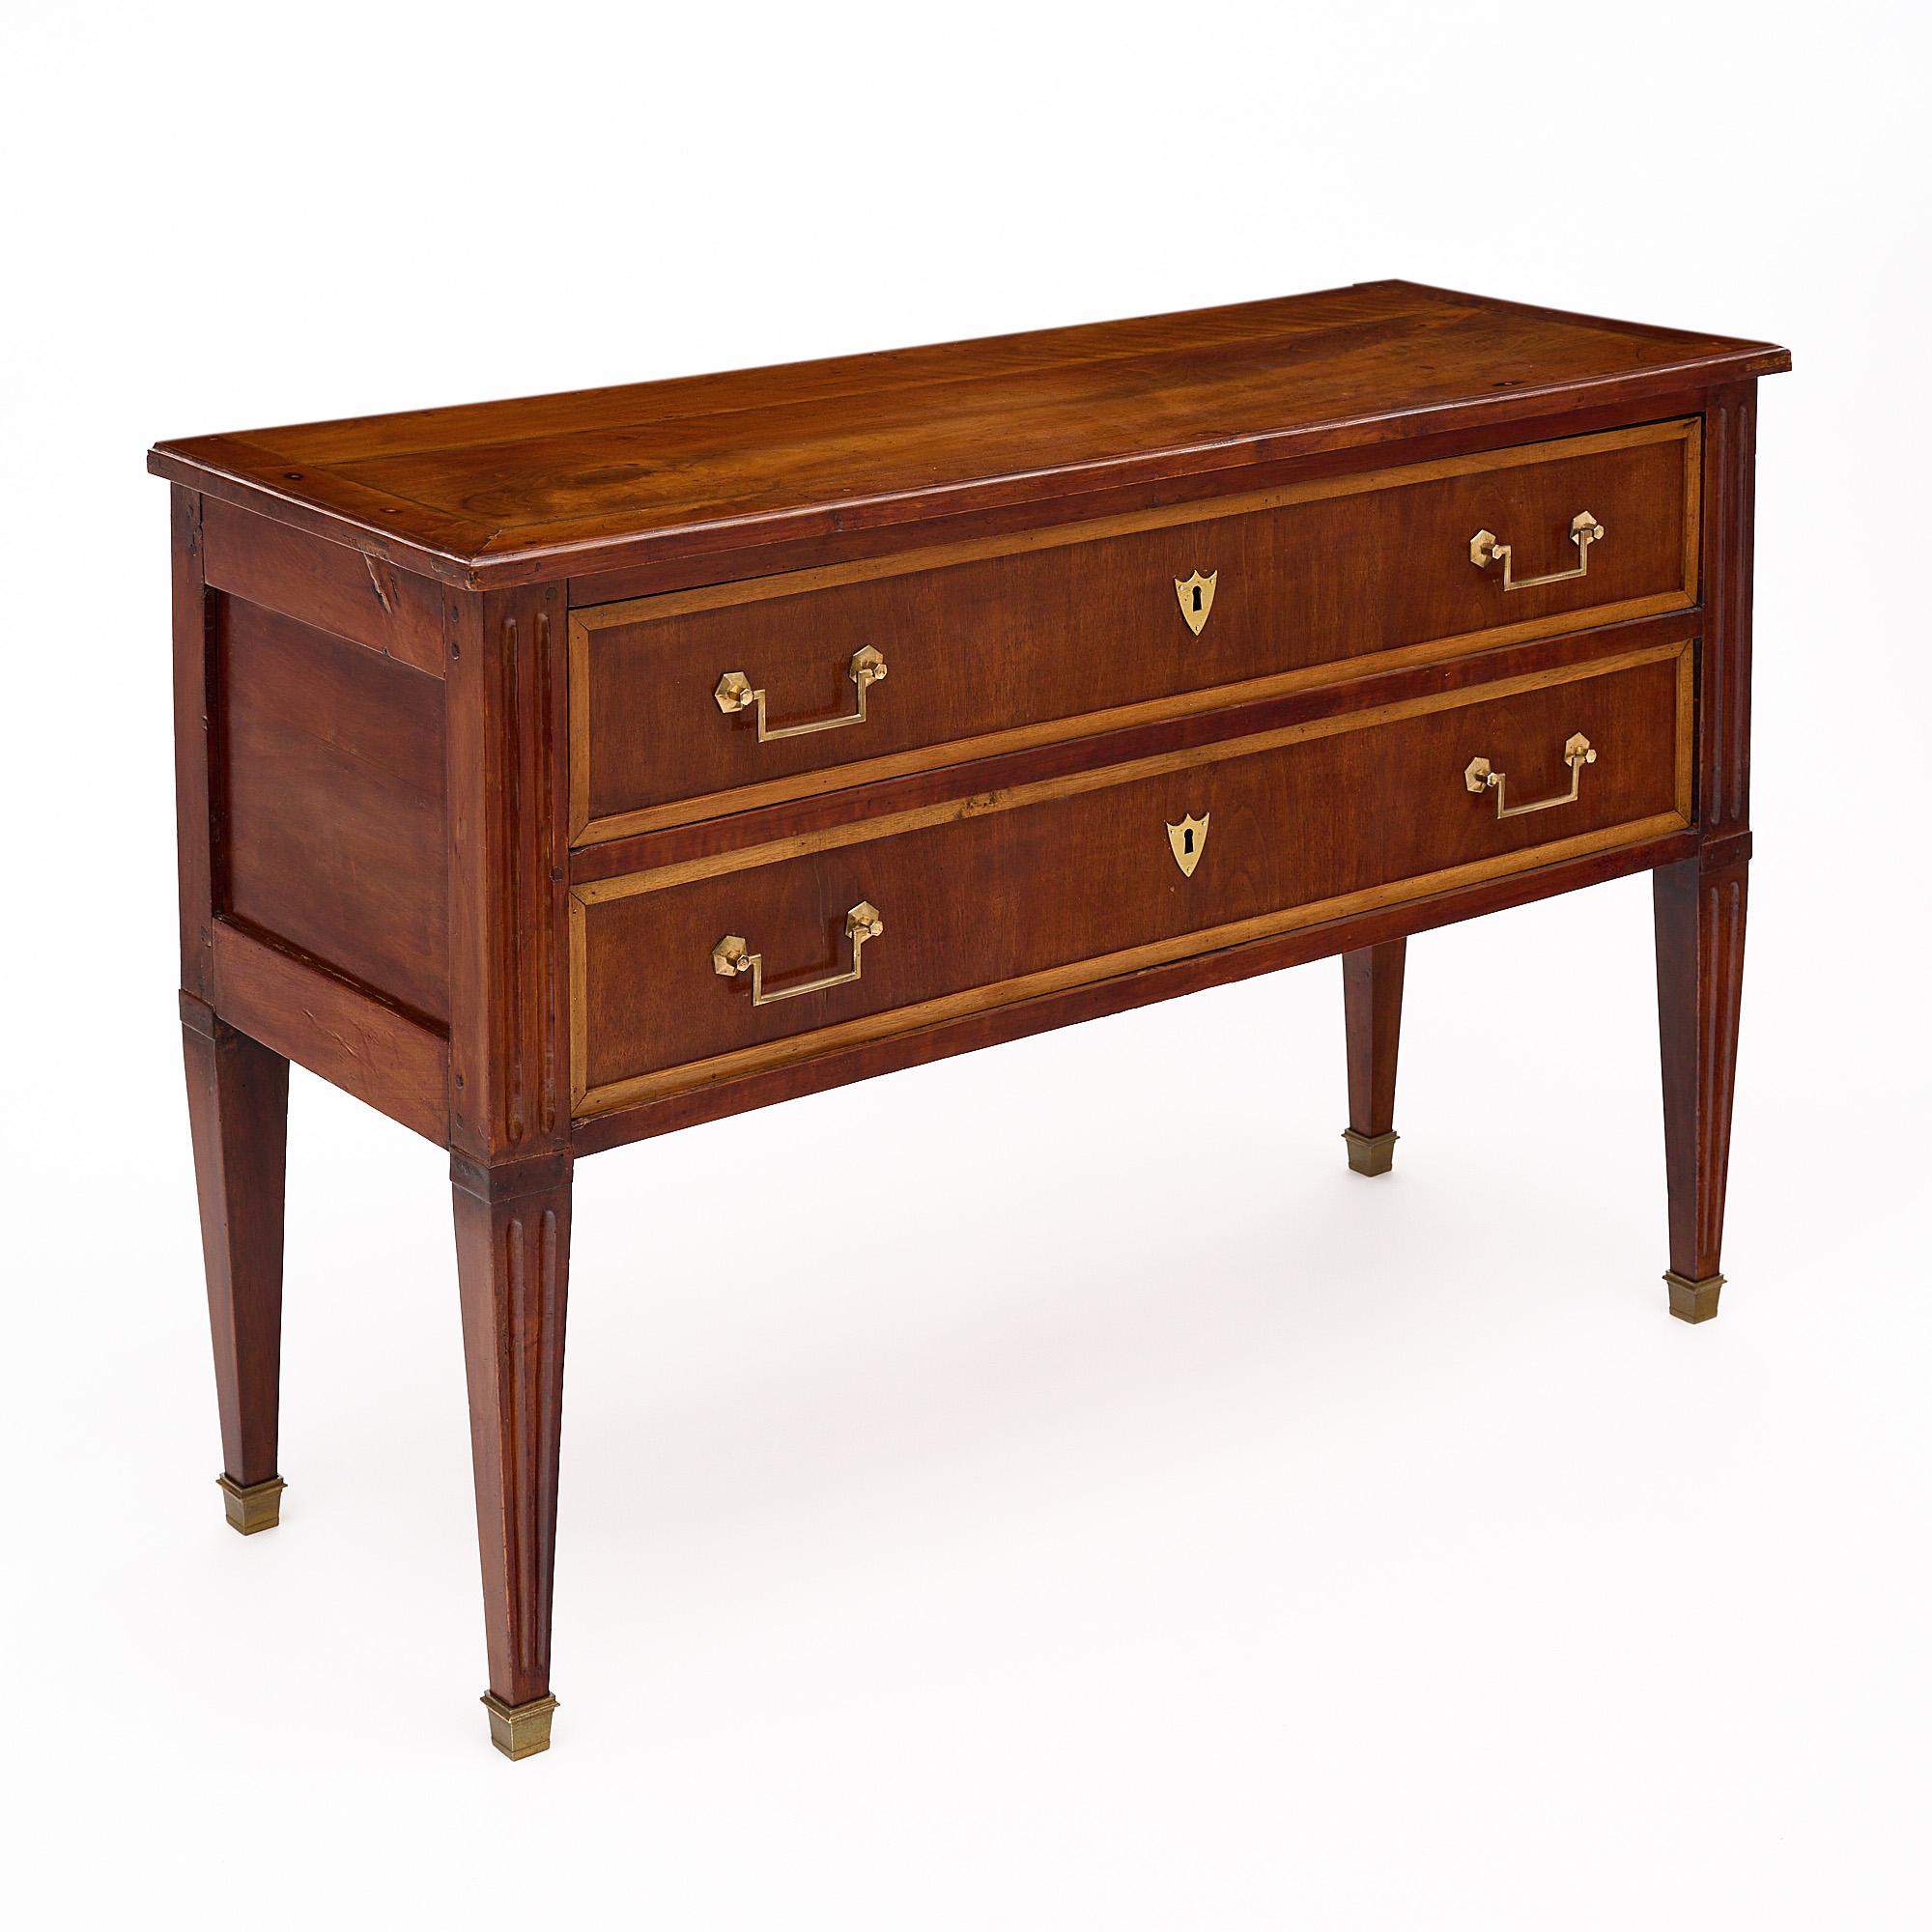 This French antique chest of drawers embodies the timeless elegance of the Louis XVI style and originates from the enchanting Rhone Valley. Carefully crafted, it highlights the stunning beauty of cherrywood and tinted cherrywood, skillfully joined